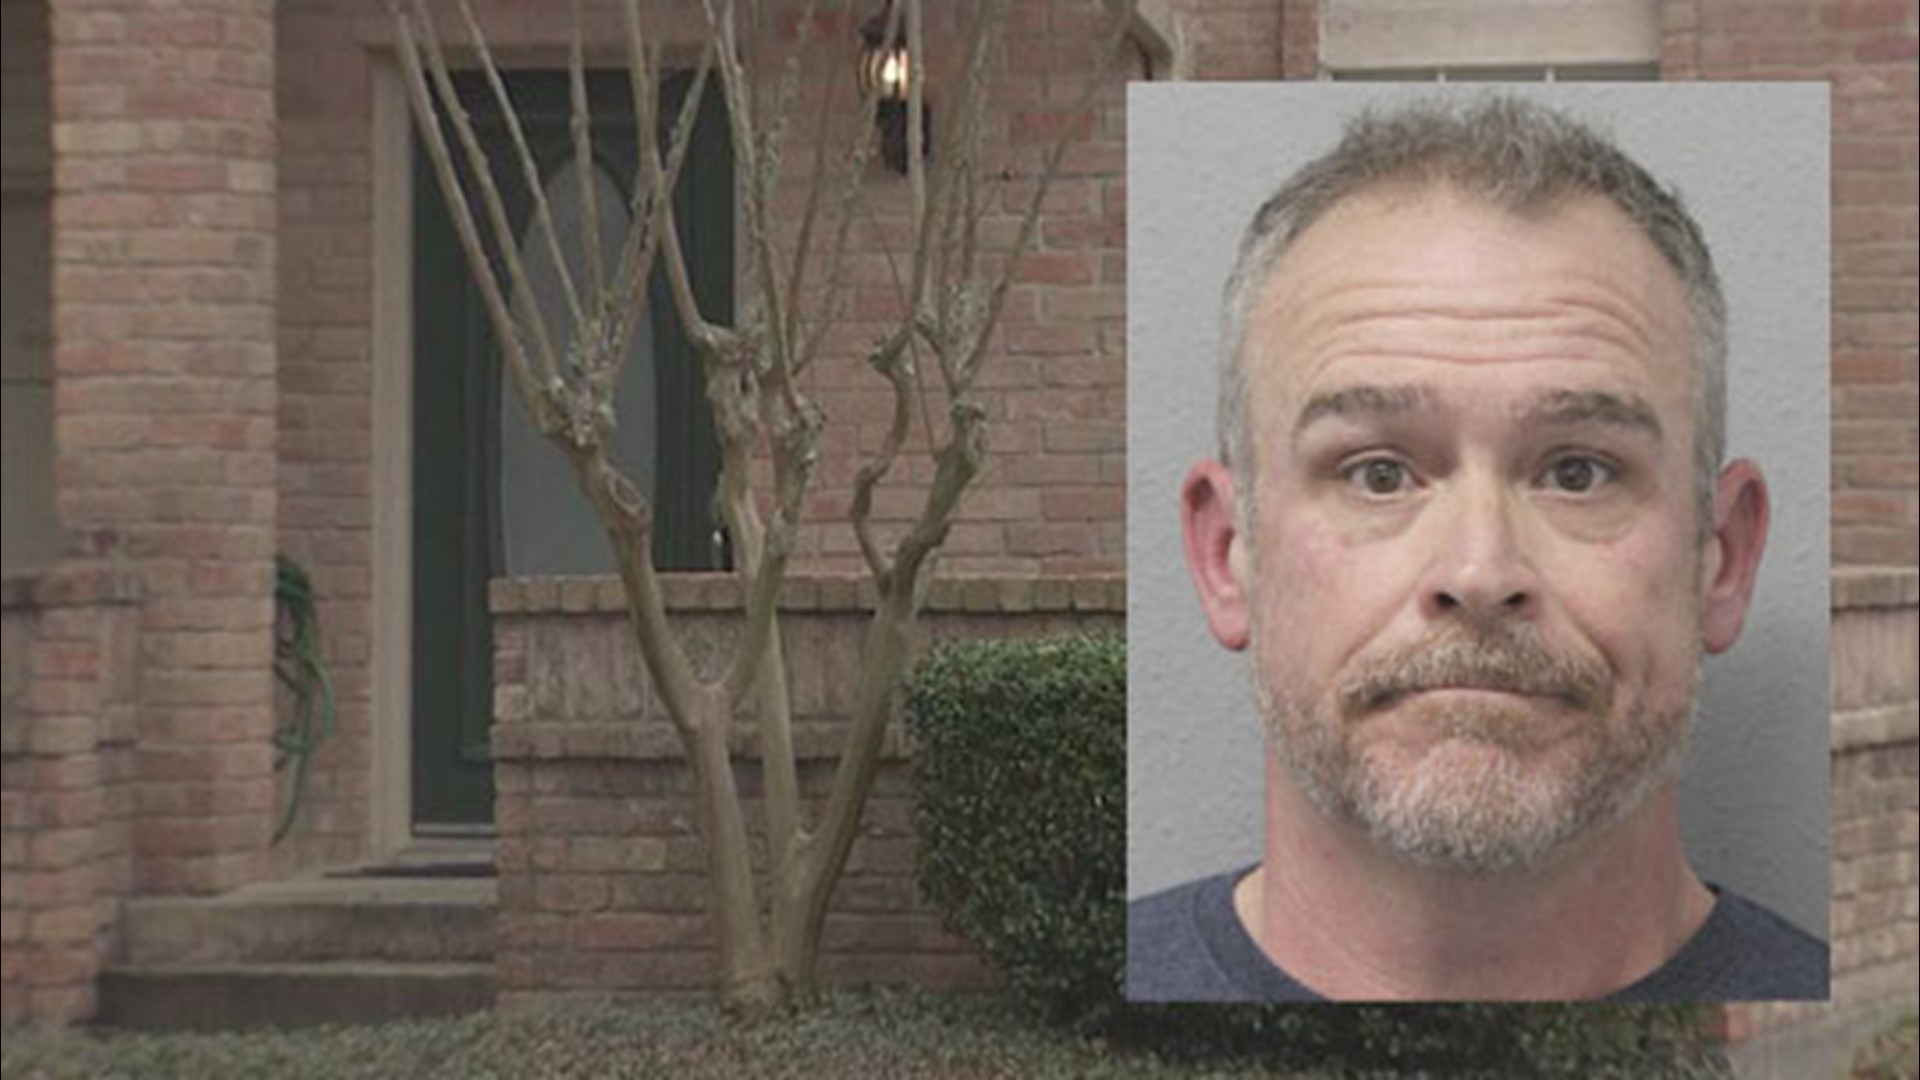 Brian Burnette is charged with invasive visual recording after investigators said he put a spy camera in his neighbor's bathroom to watch her take showers.